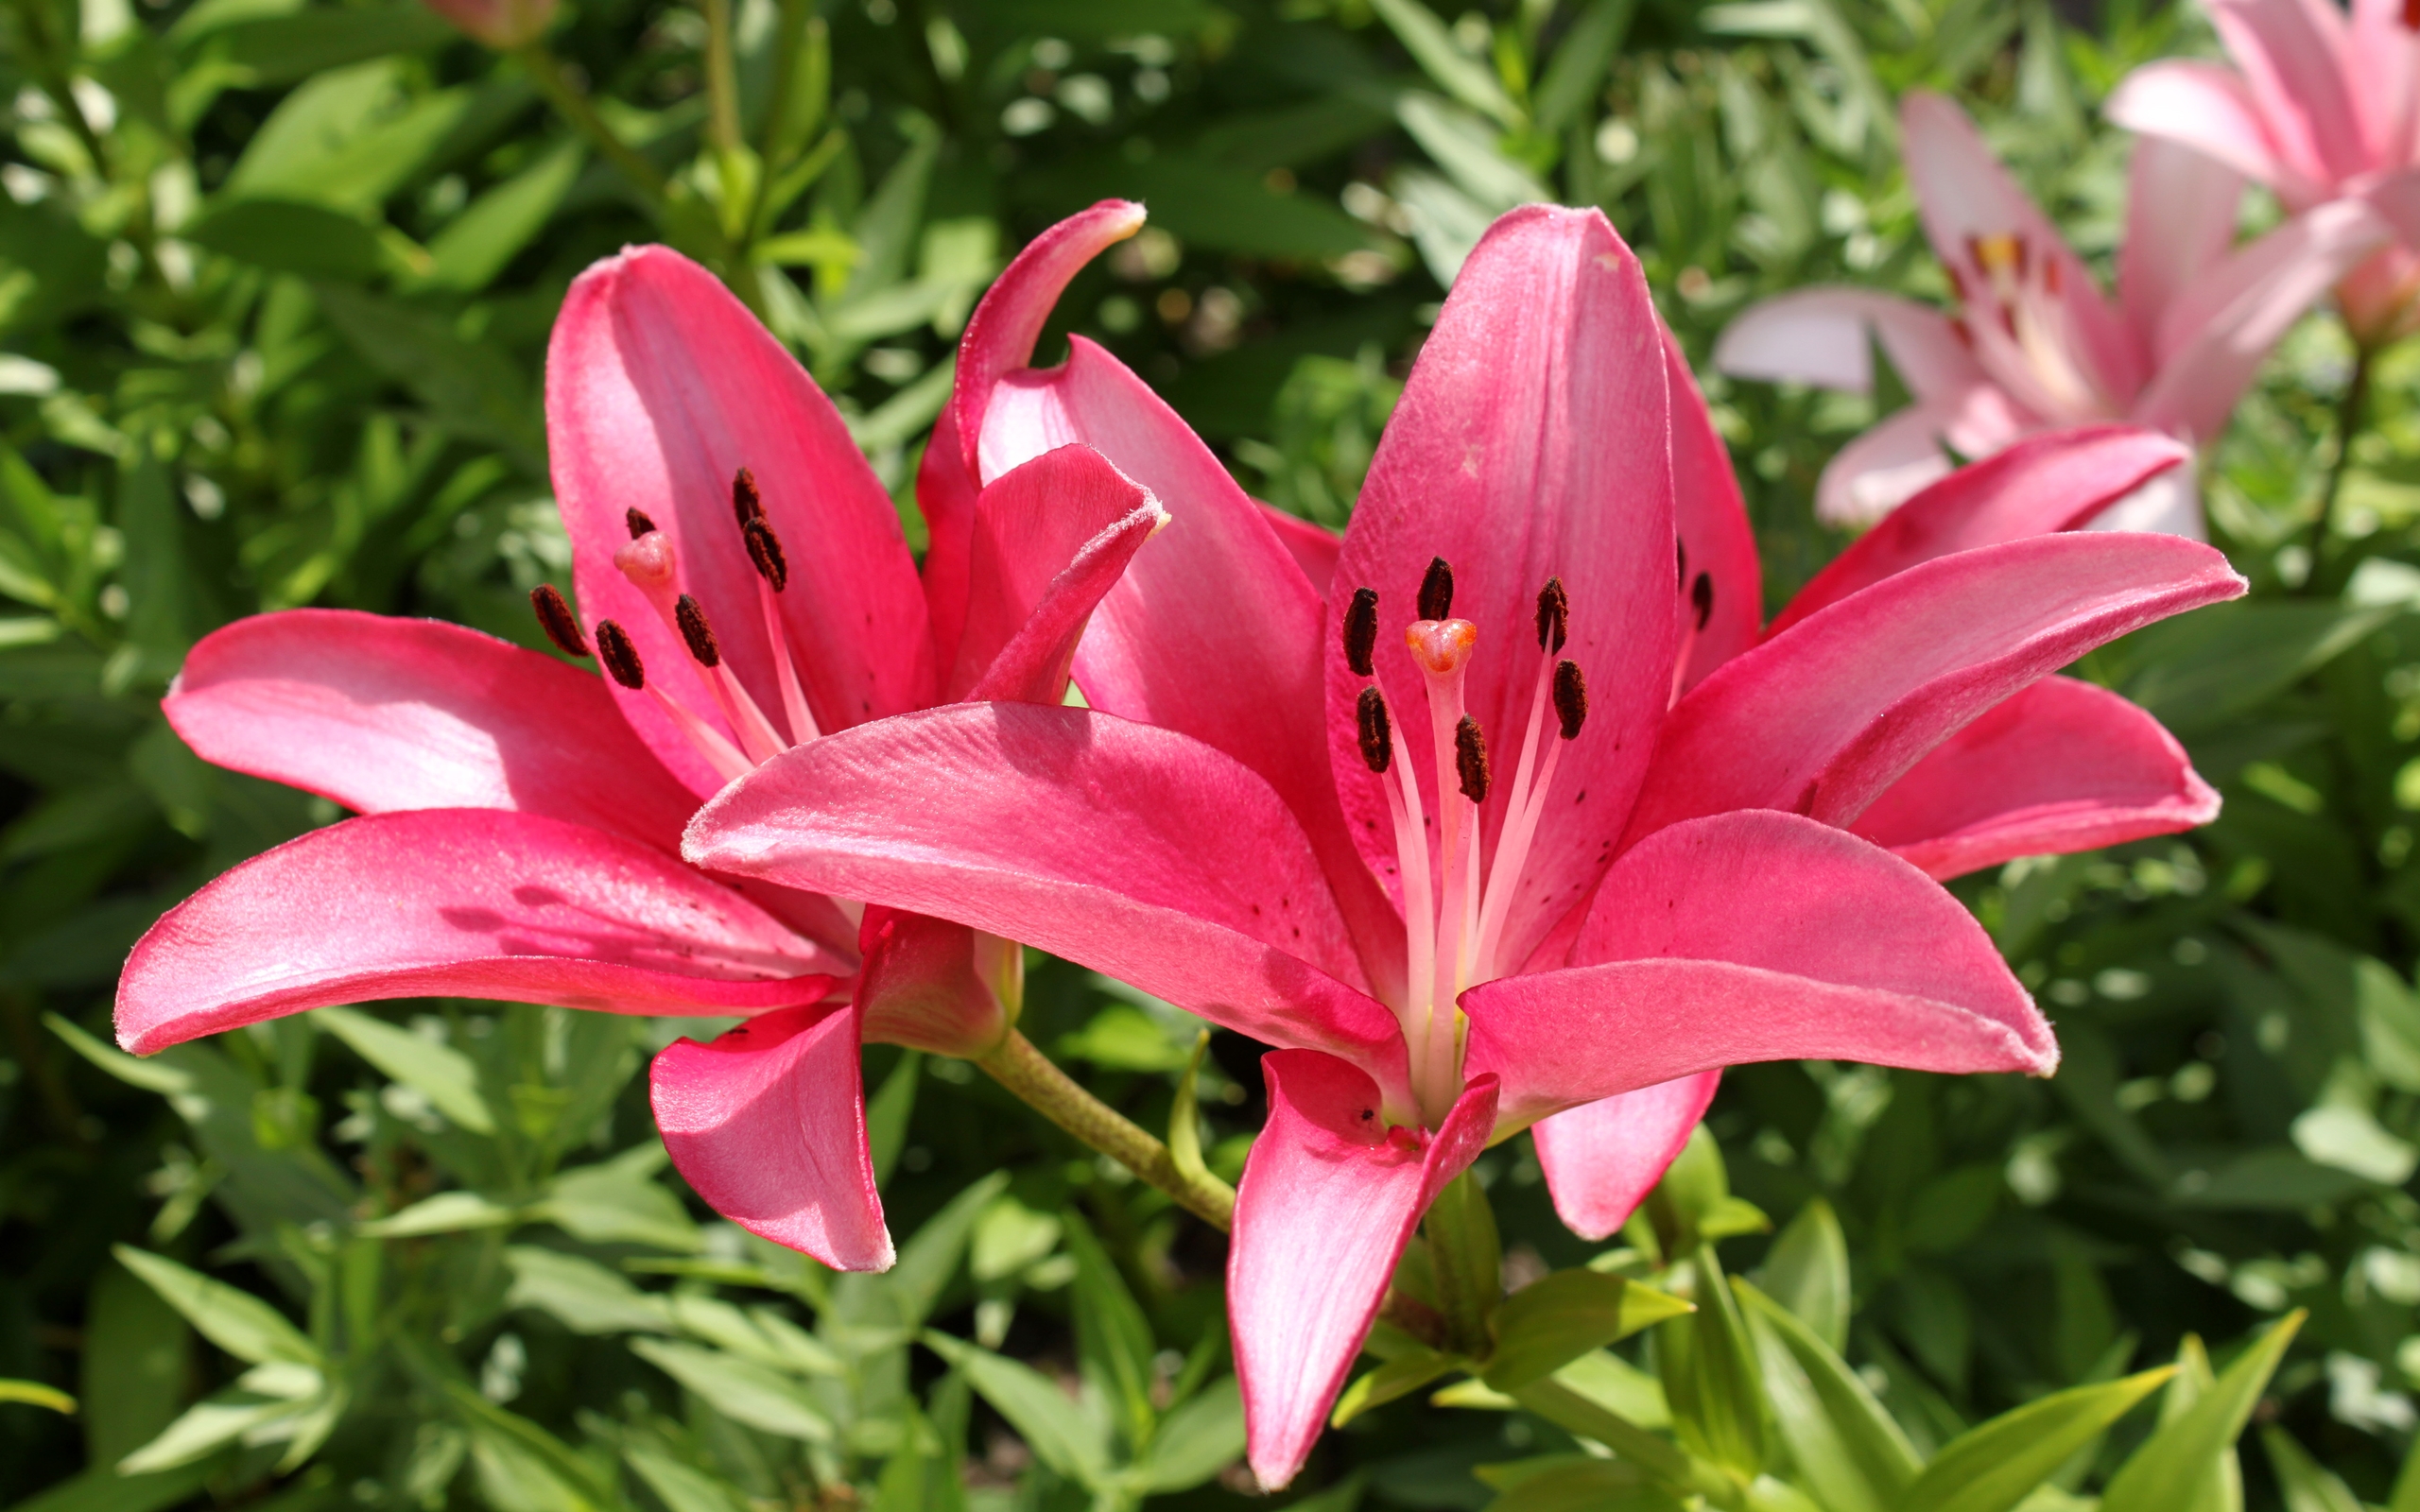 Small Pink Lily Like Flowers 3 : Wallpapers13.com